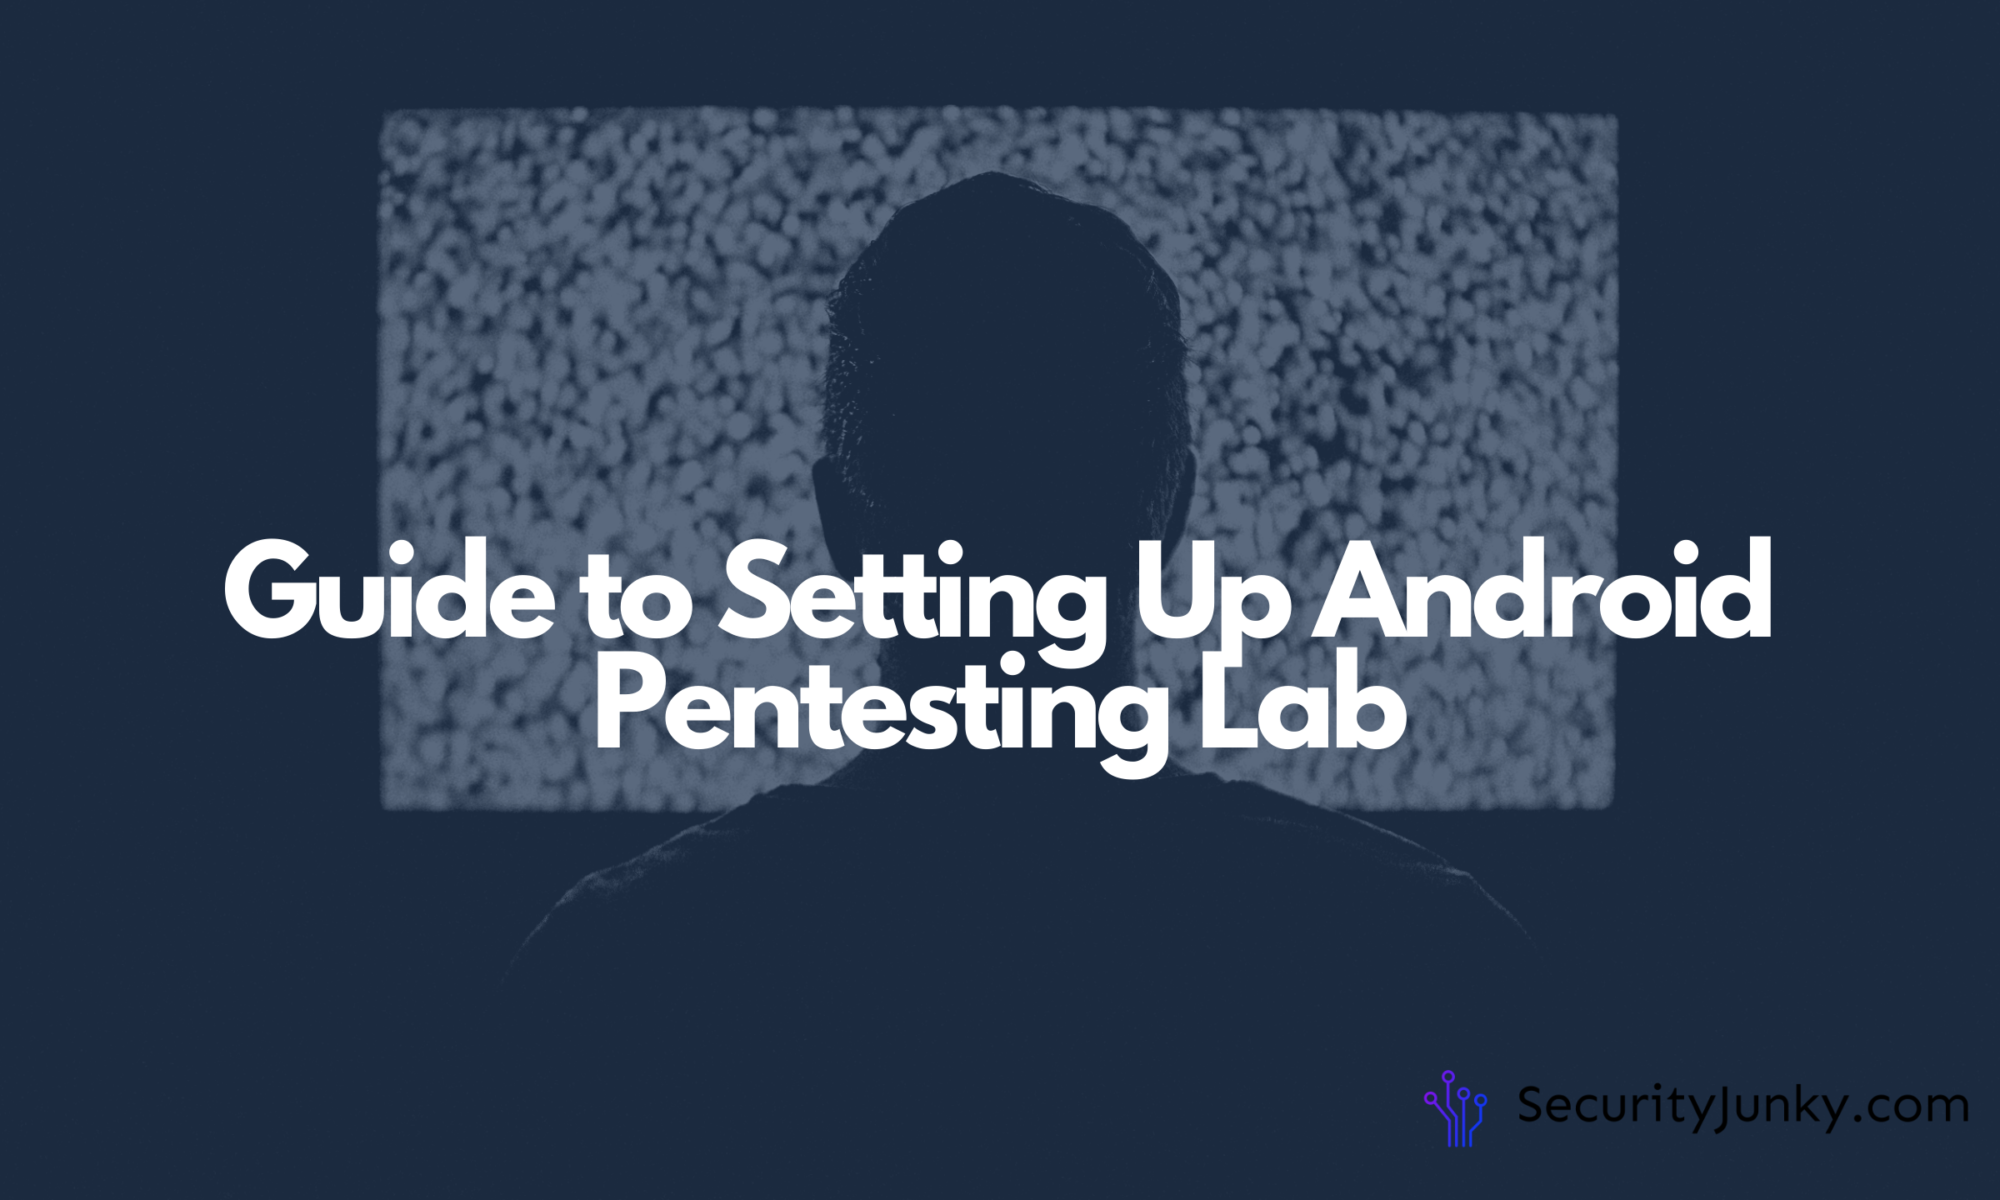 Guide to Setting Up Android Pentesting Lab